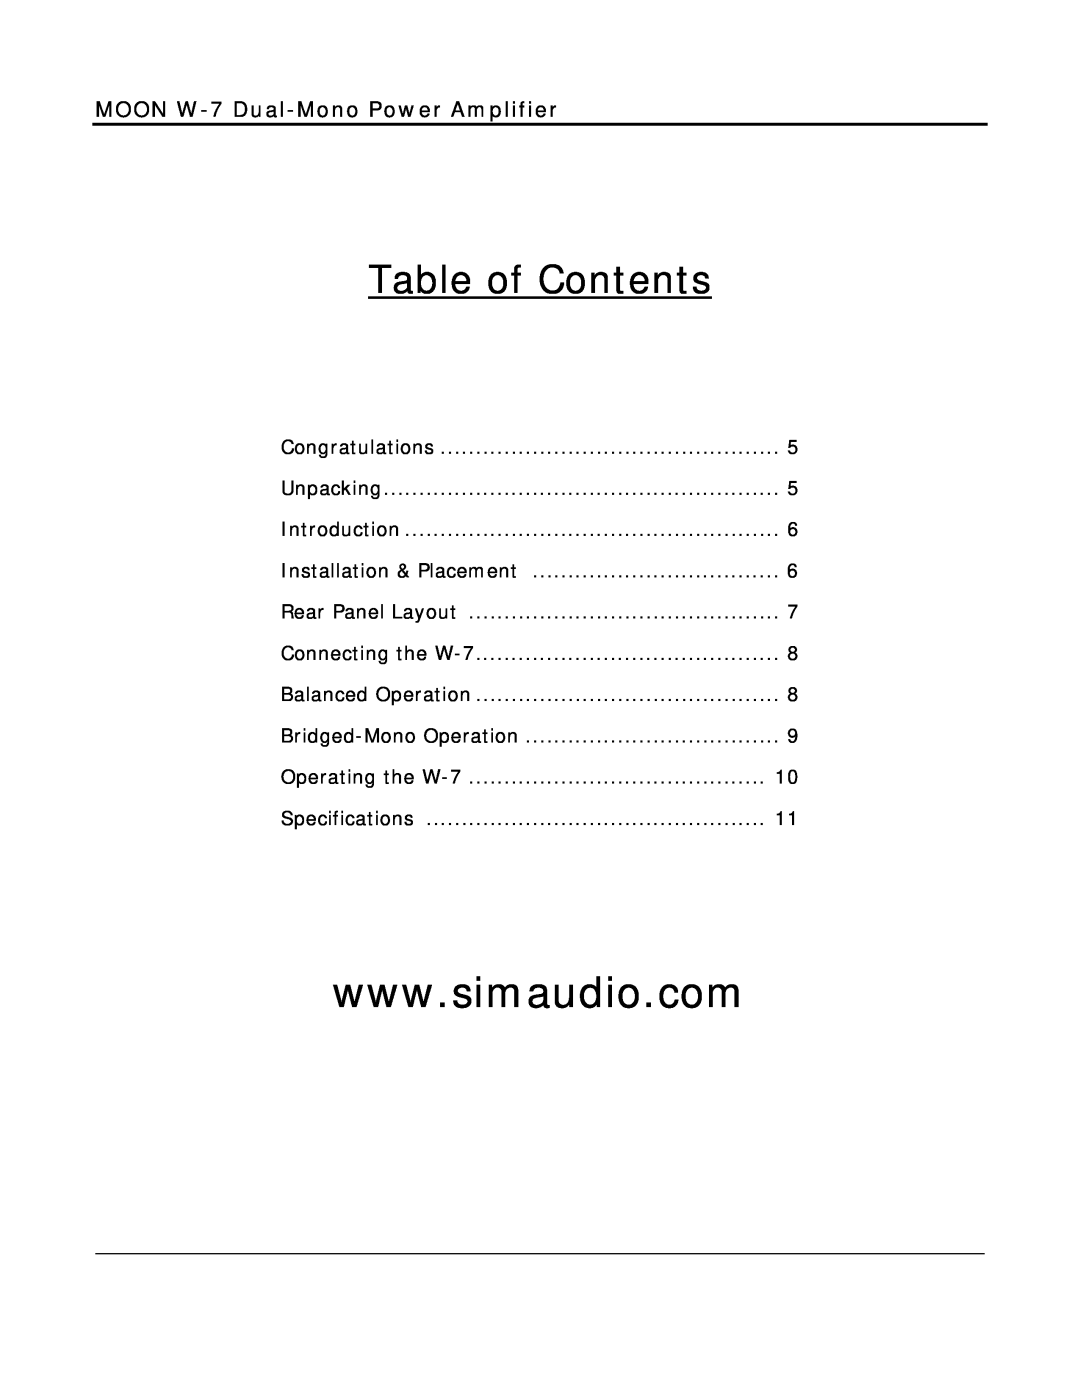 Simaudio owner manual Table of Contents, MOON W-7 Dual-MonoPower Amplifier 